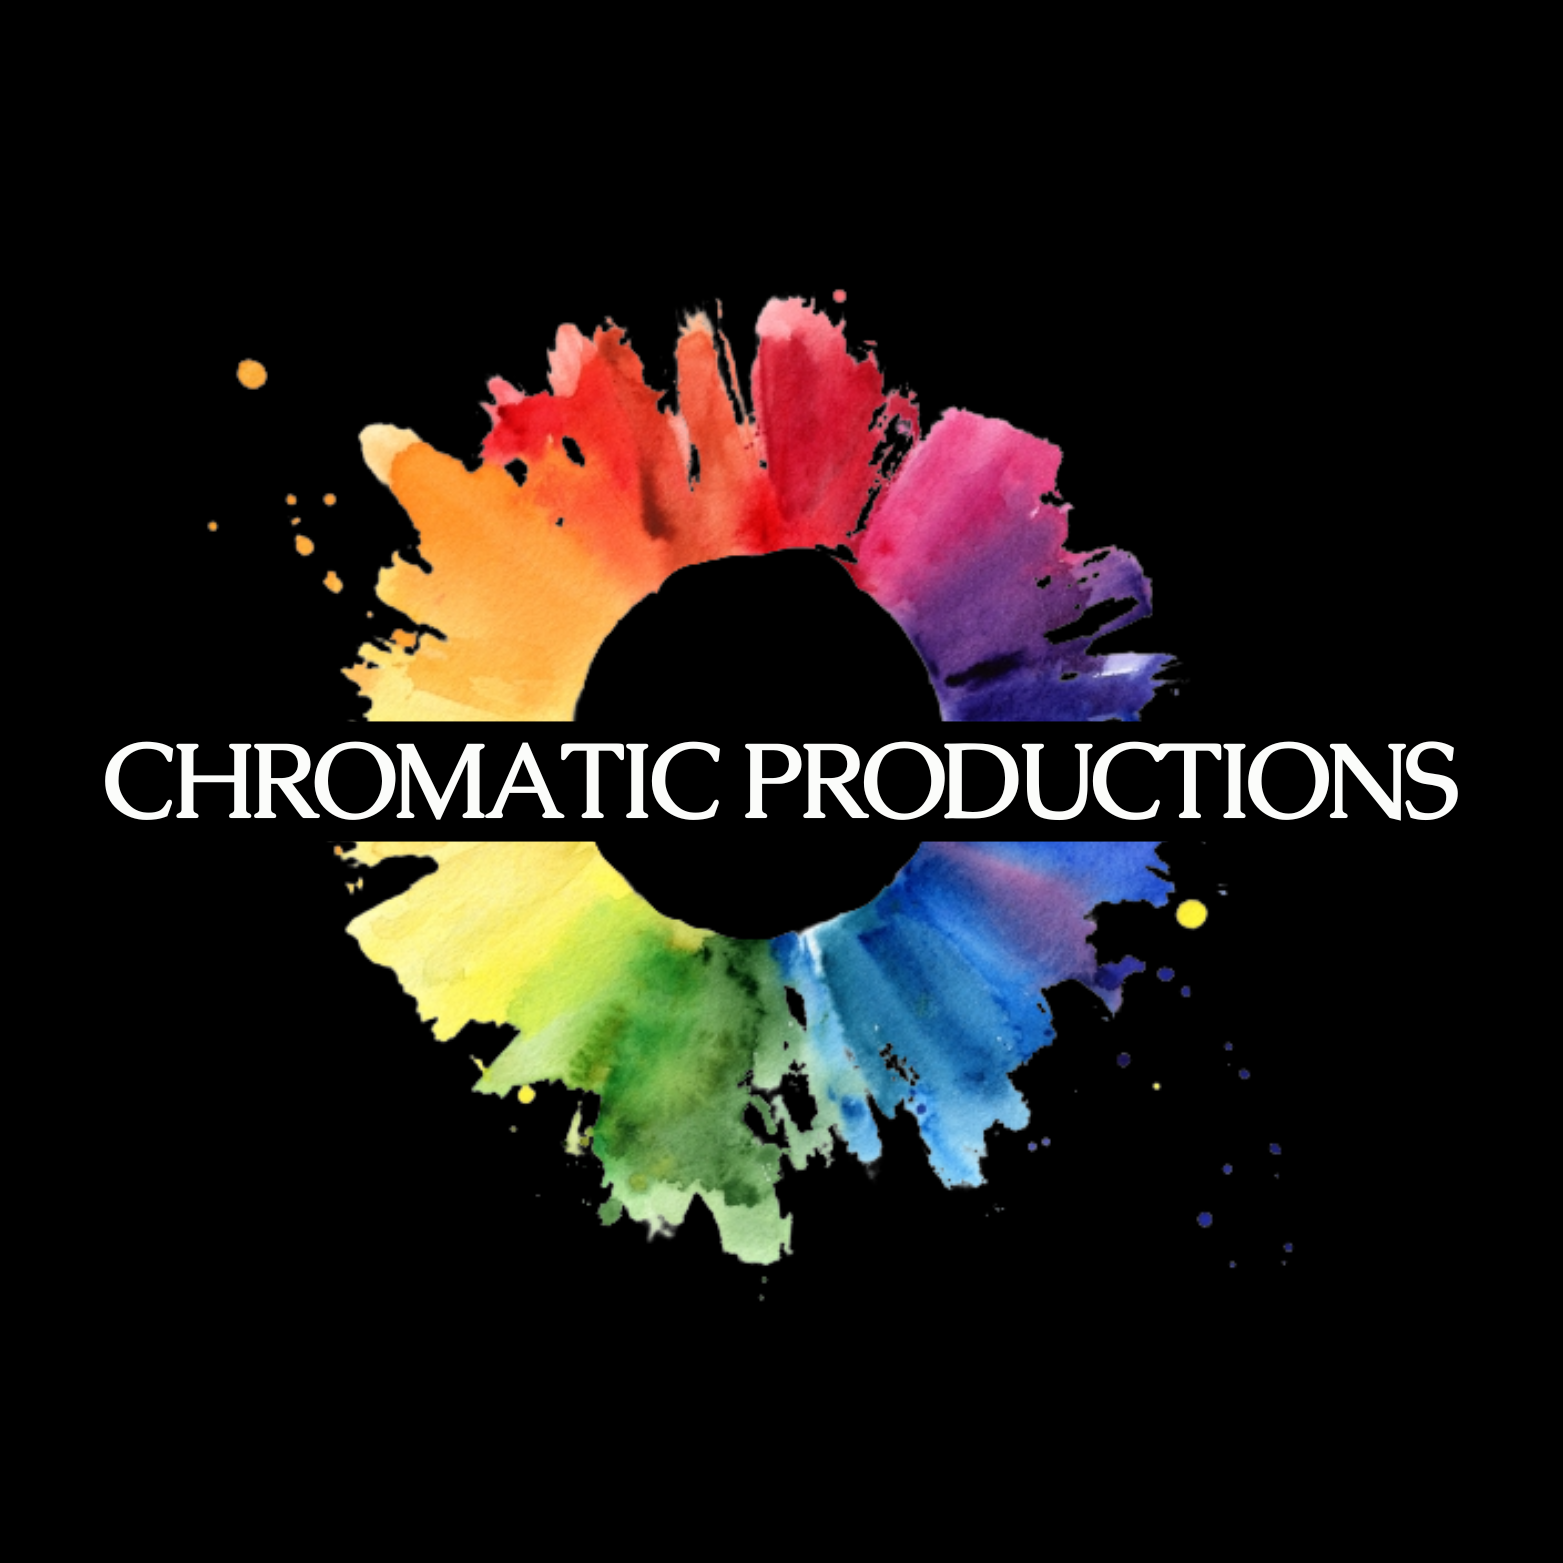 Chromatic Productions